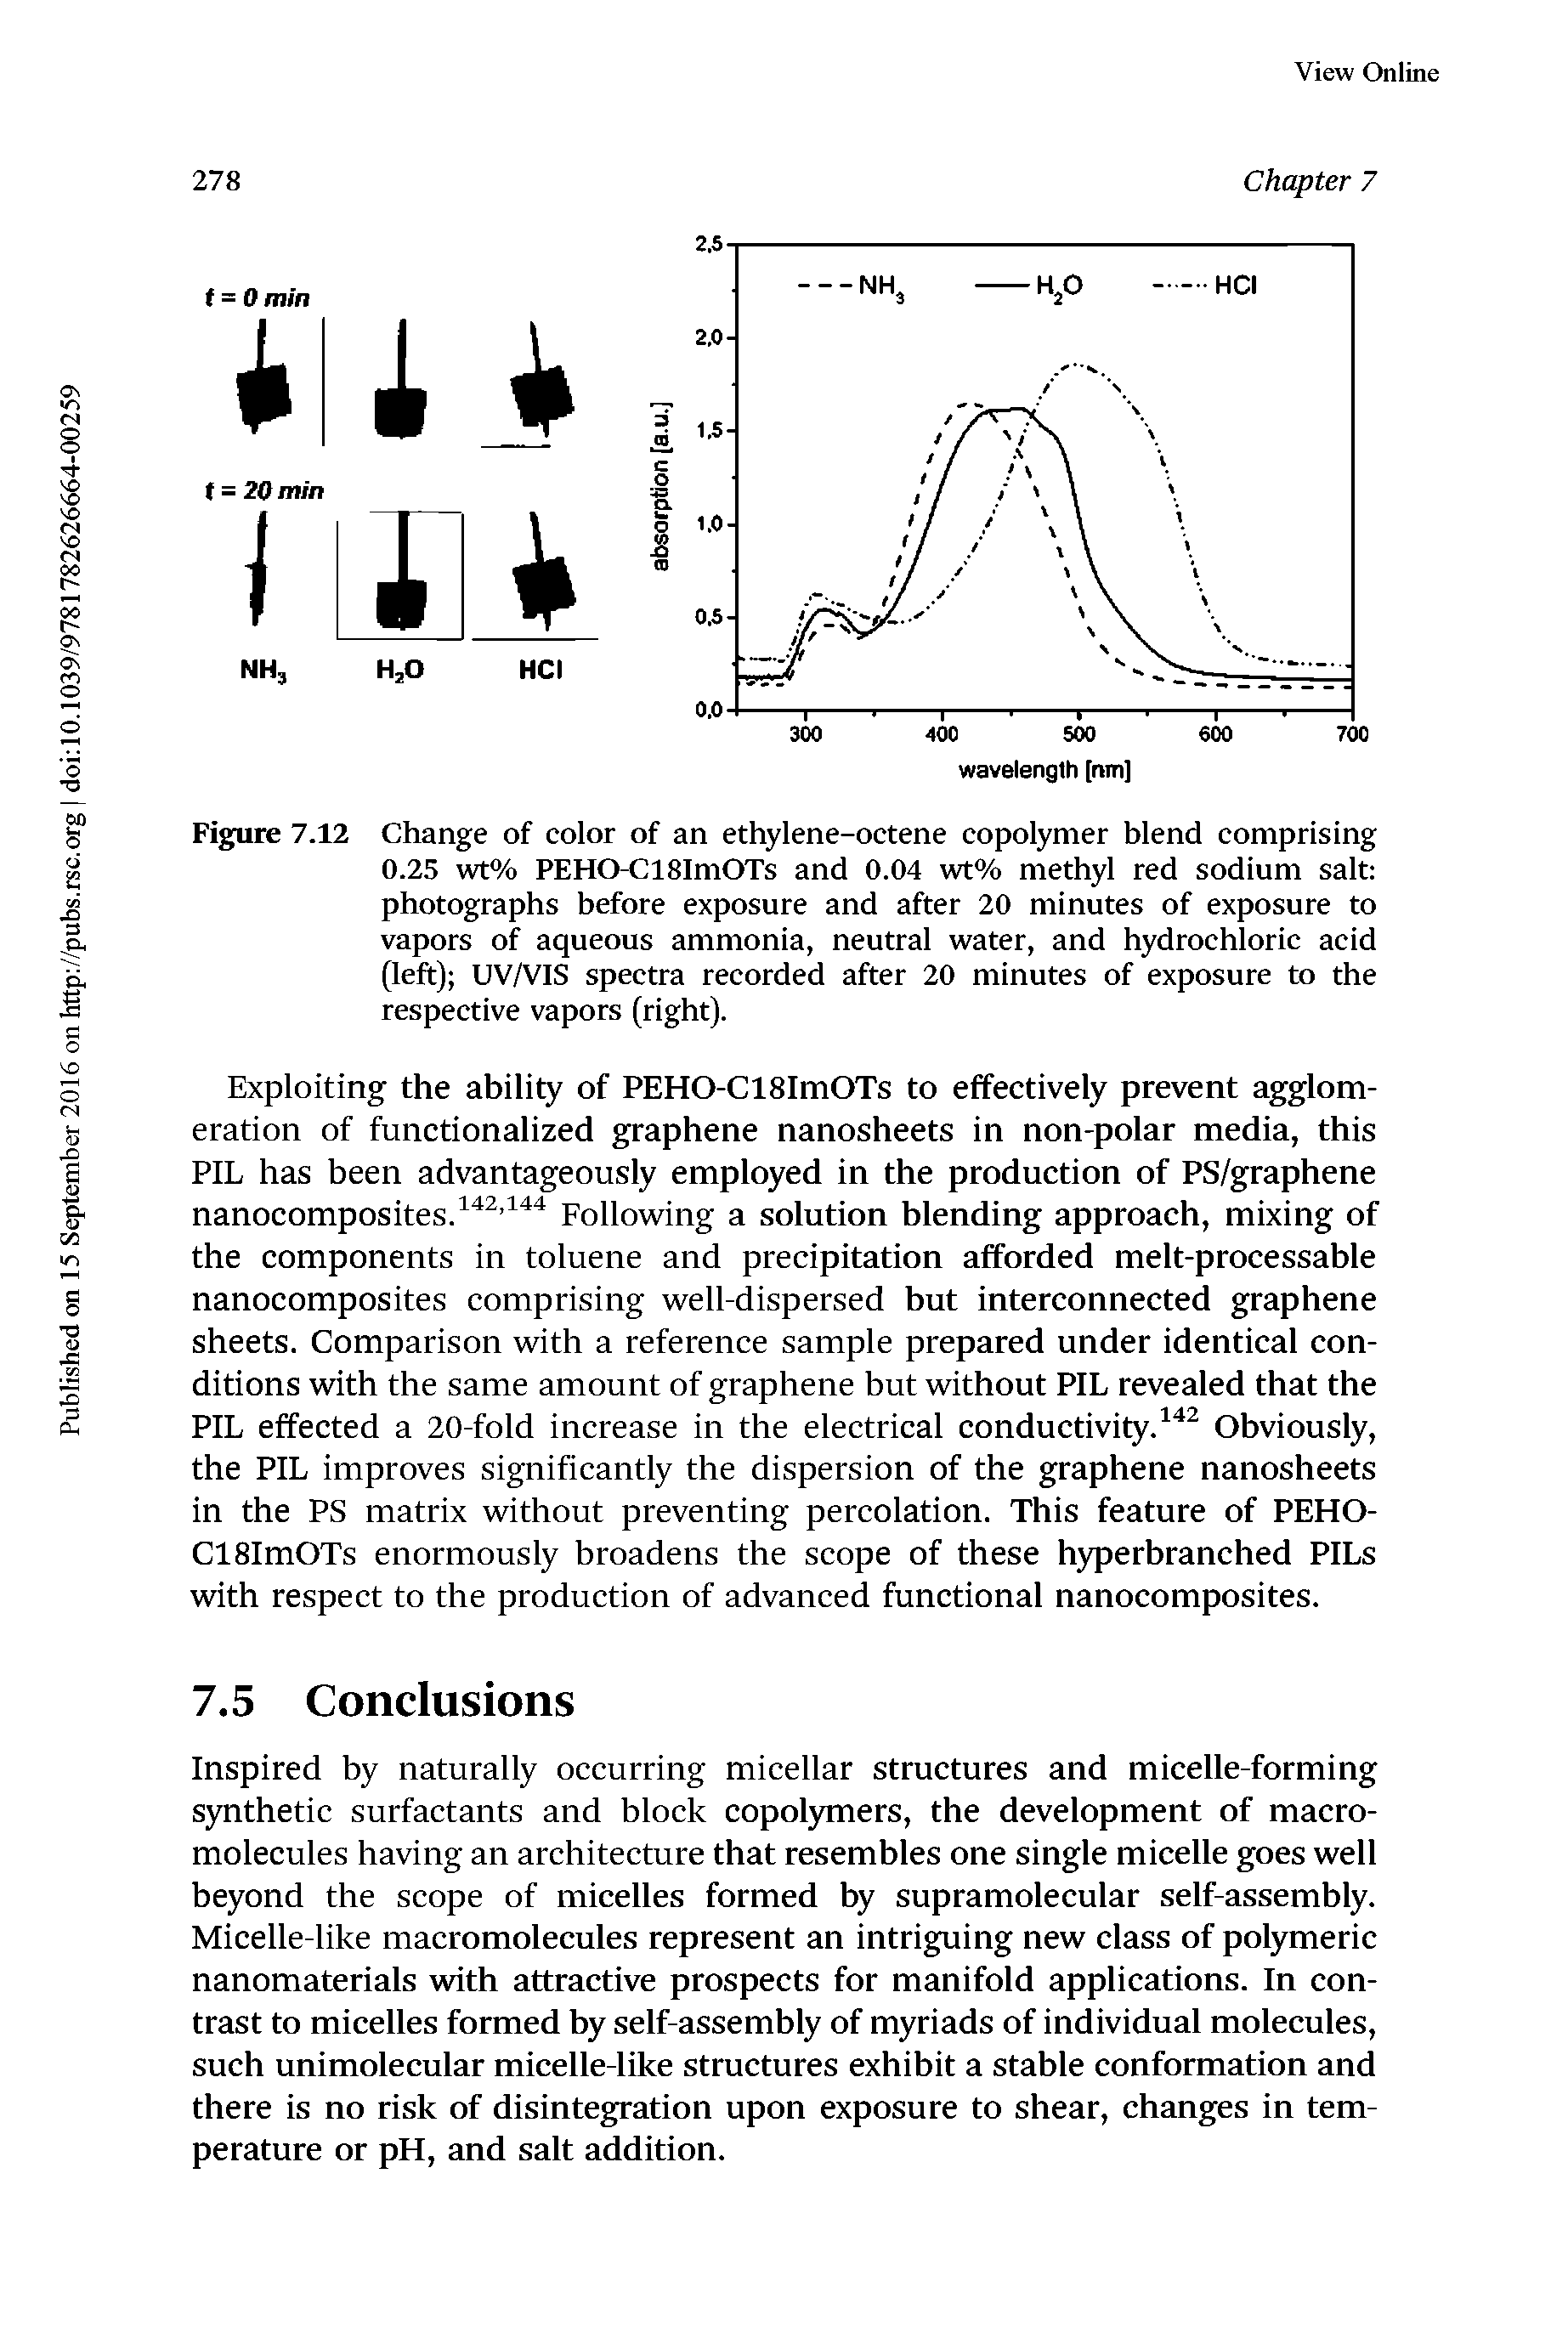 Figure 7.12 Change of color of an ethylene-octene copolymer blend comprising 0.25 wt% PEHO-C18ImOTs and 0.04 wt% methyl red sodium salt photographs before exposure and after 20 minutes of exposure to vapors of aqueous ammonia, neutral water, and hydrochloric acid (left) UVA IS spectra recorded after 20 minutes of exposure to the respective vapors (right).